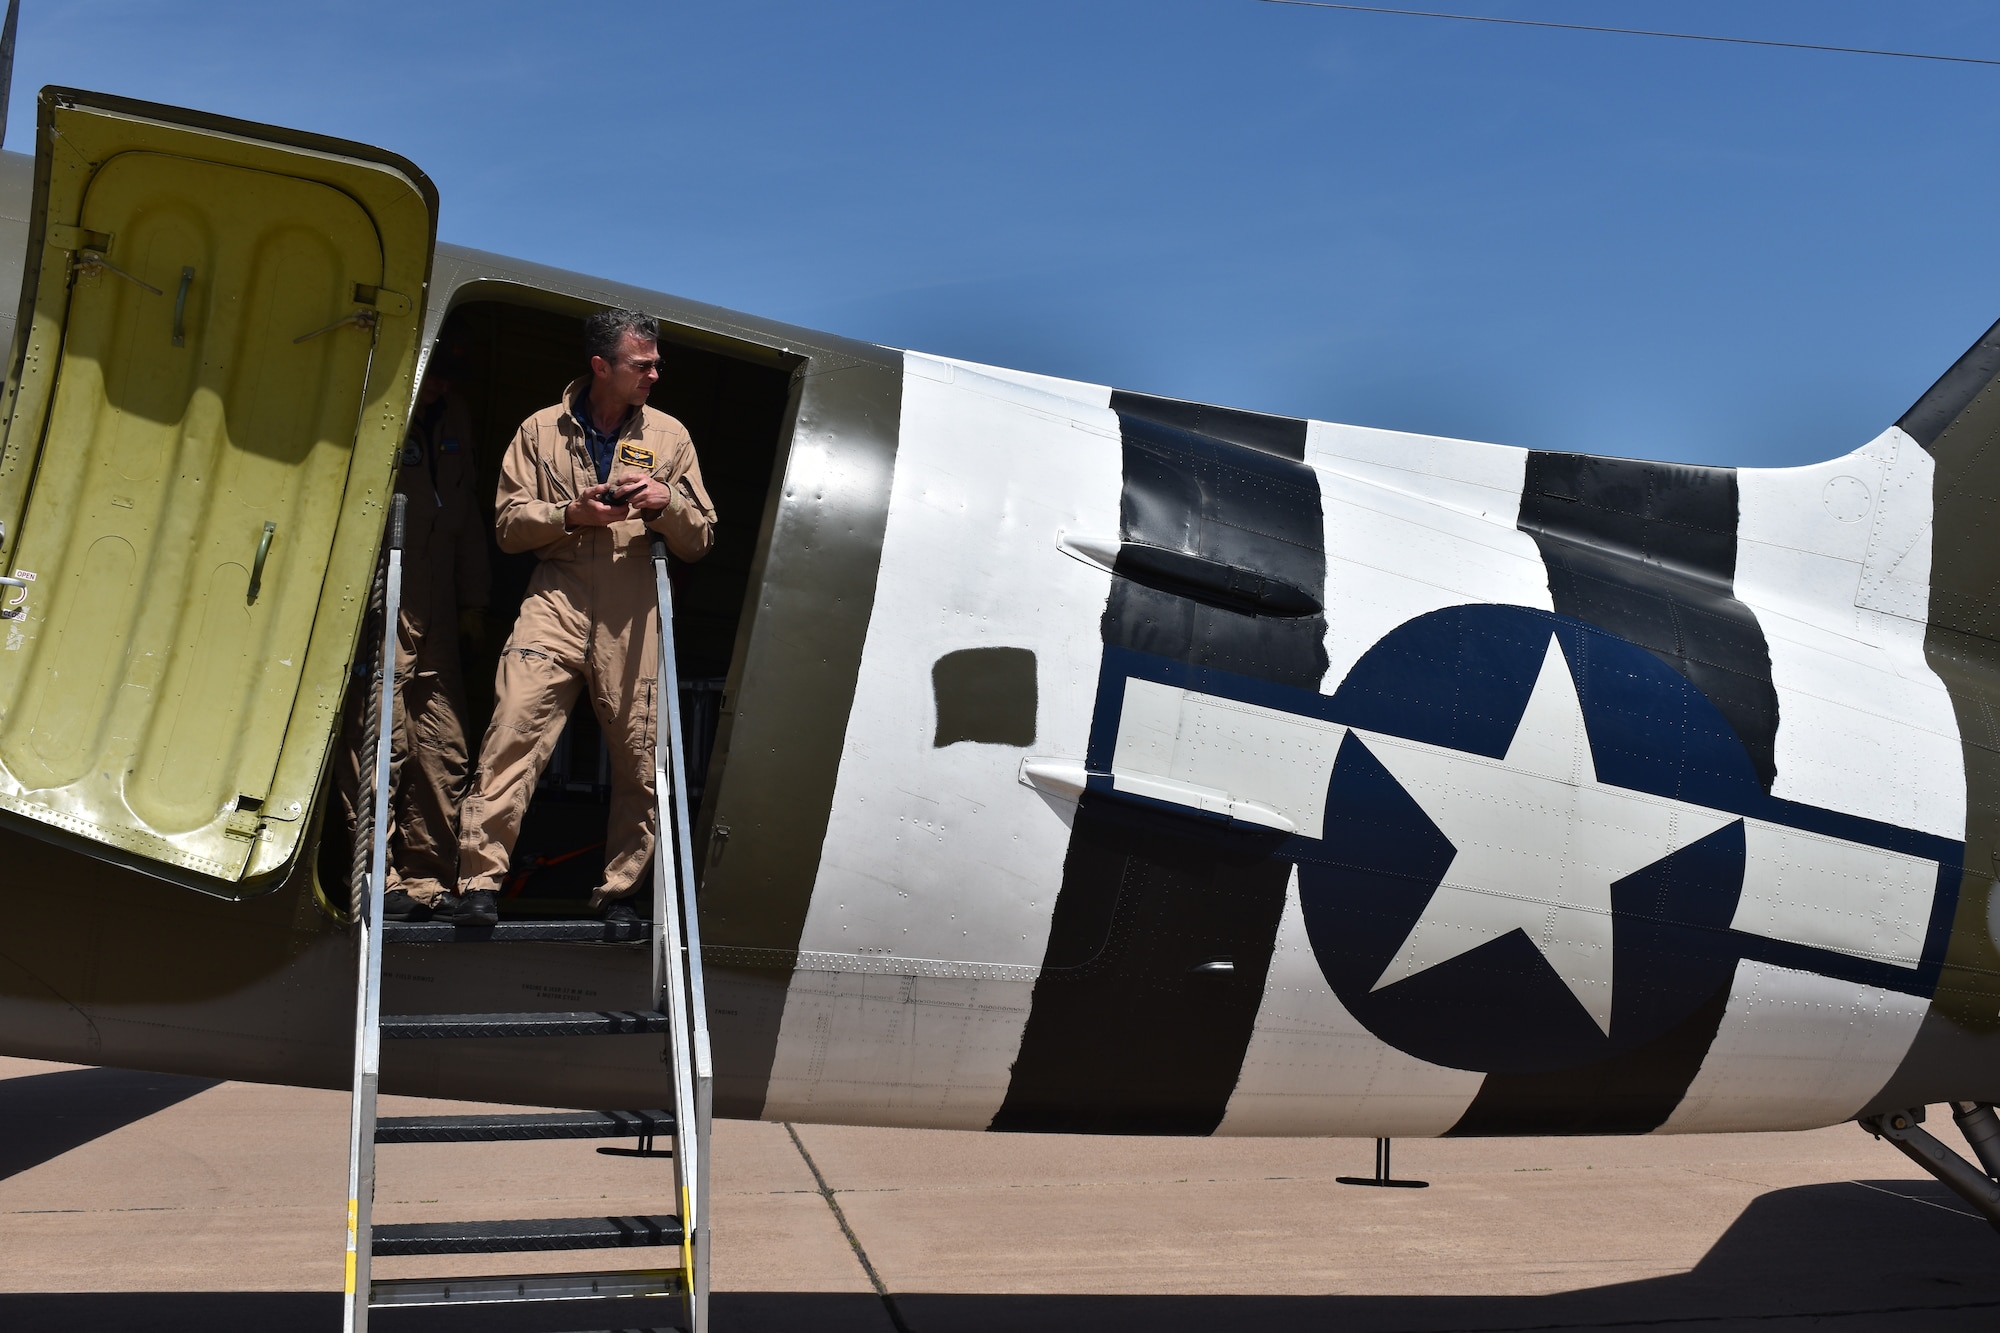 John Cotter, Commemorative Air Force Ghost Squadron C-47 pilot, prepares for a flight during the 2023 Dyess Big Country Air Fest rehearsal day at Dyess Air Force Base, Texas, April 21, 2023. More than 30,000 event goers attended the one-day event highlighting the best of America’s only Lift and Strike base, Air Force heritage and Dyess community partners. The air show featured the F-22 Raptor demo team, U.S. Air Force Academy Wings of Blue, U.S. Army Golden Knights, WWII heritage flight and B-1B Lancer and C-130J Super Hercules fly overs. (U.S. Air Force photo by Staff Sgt. Matthew Angulo)